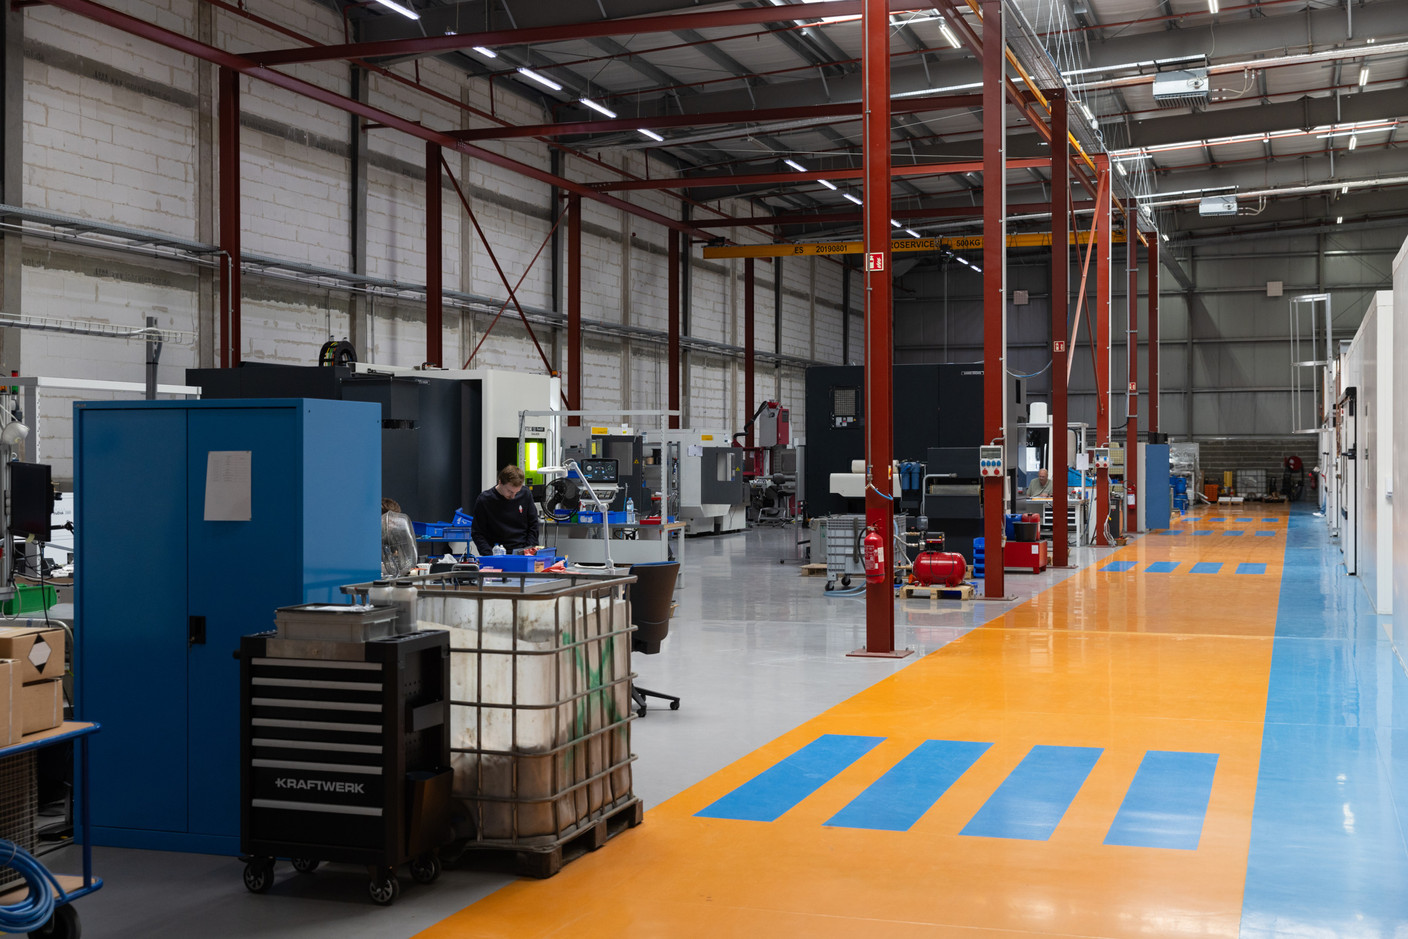 The SME has 5,000m2 of production space. Photo: Romain Gamba/Maison Moderne